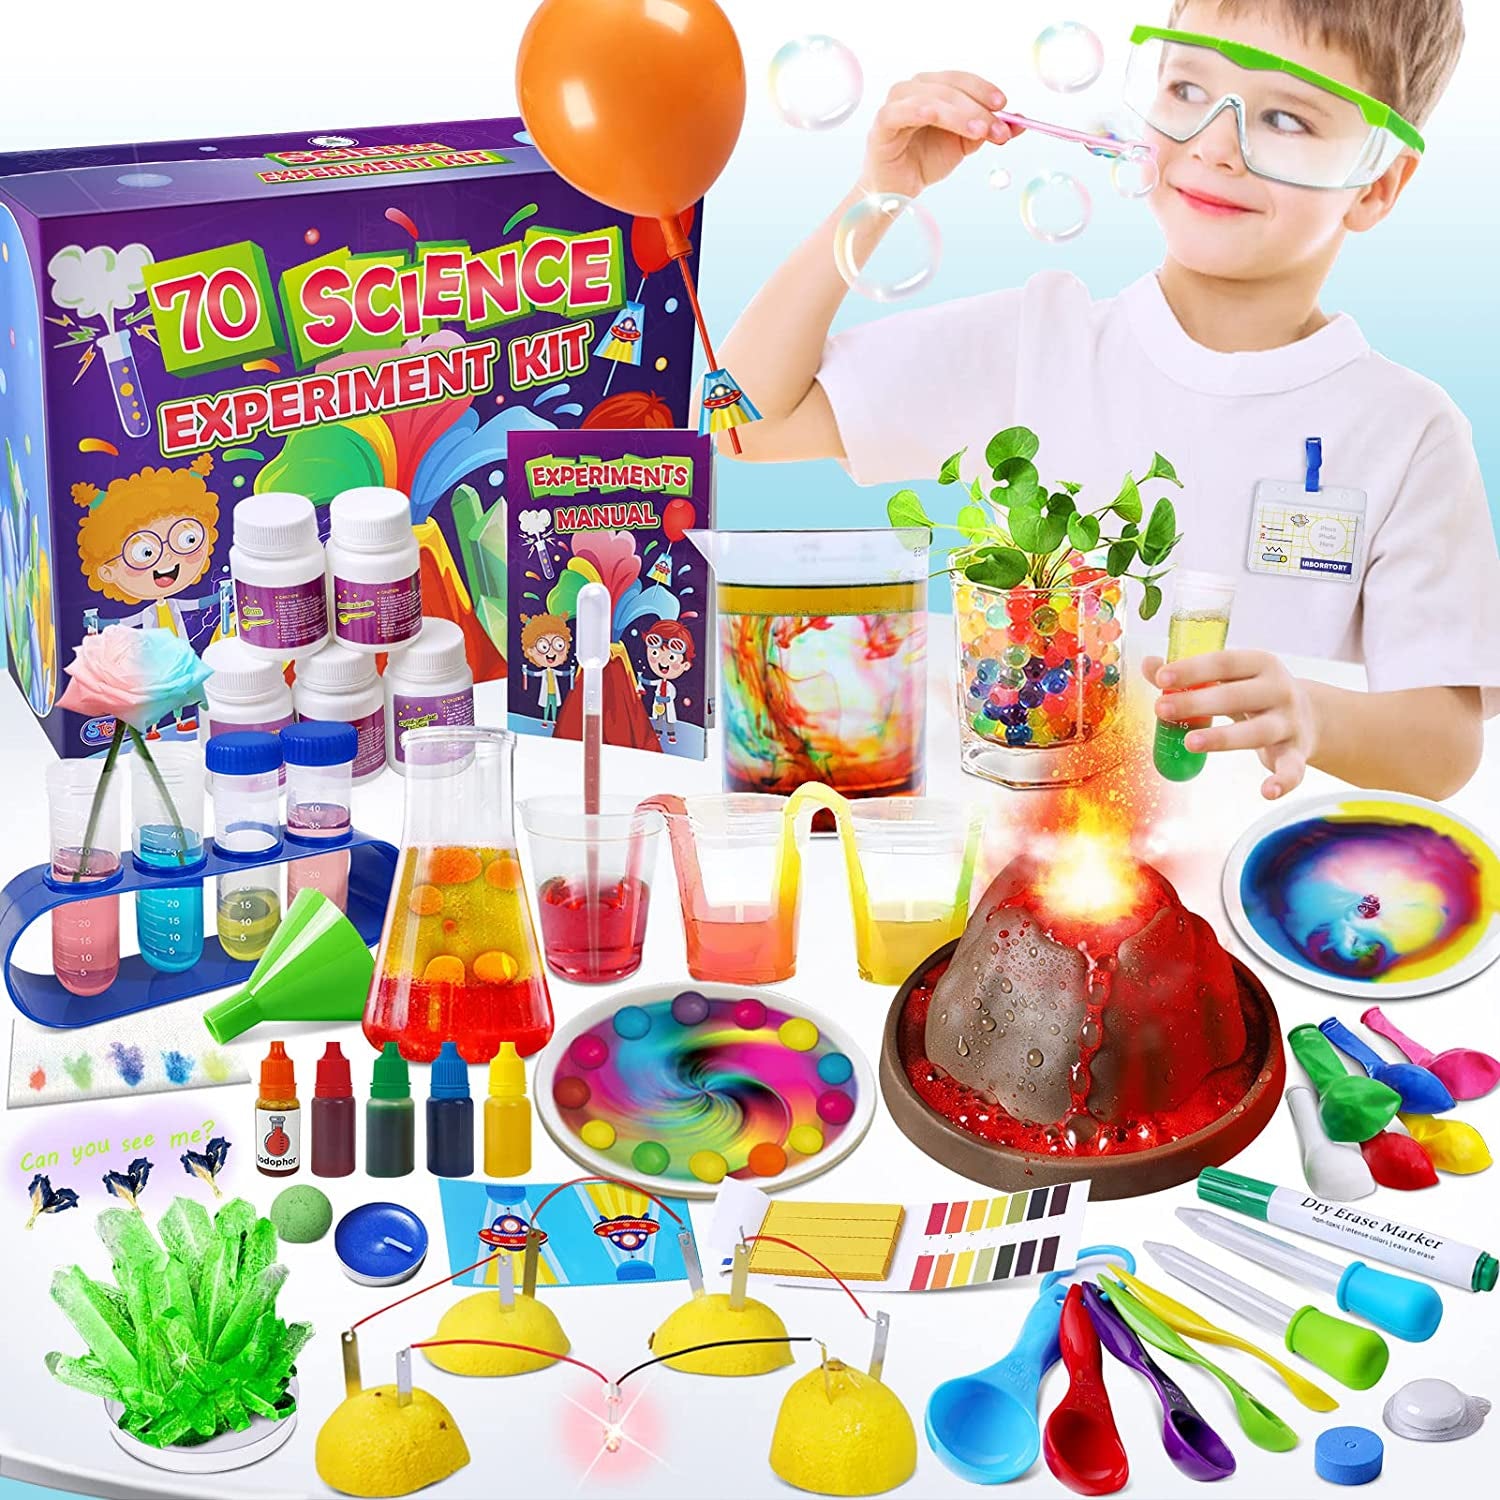 70 Lab Experiments Science Kits for Kids Age 4-6-8-12 Educational Scientific Toys Gifts for Girls Boys, Chemistry Set, Crystal Growing, Erupting Volcano, Fruit Circuits STEM Activities